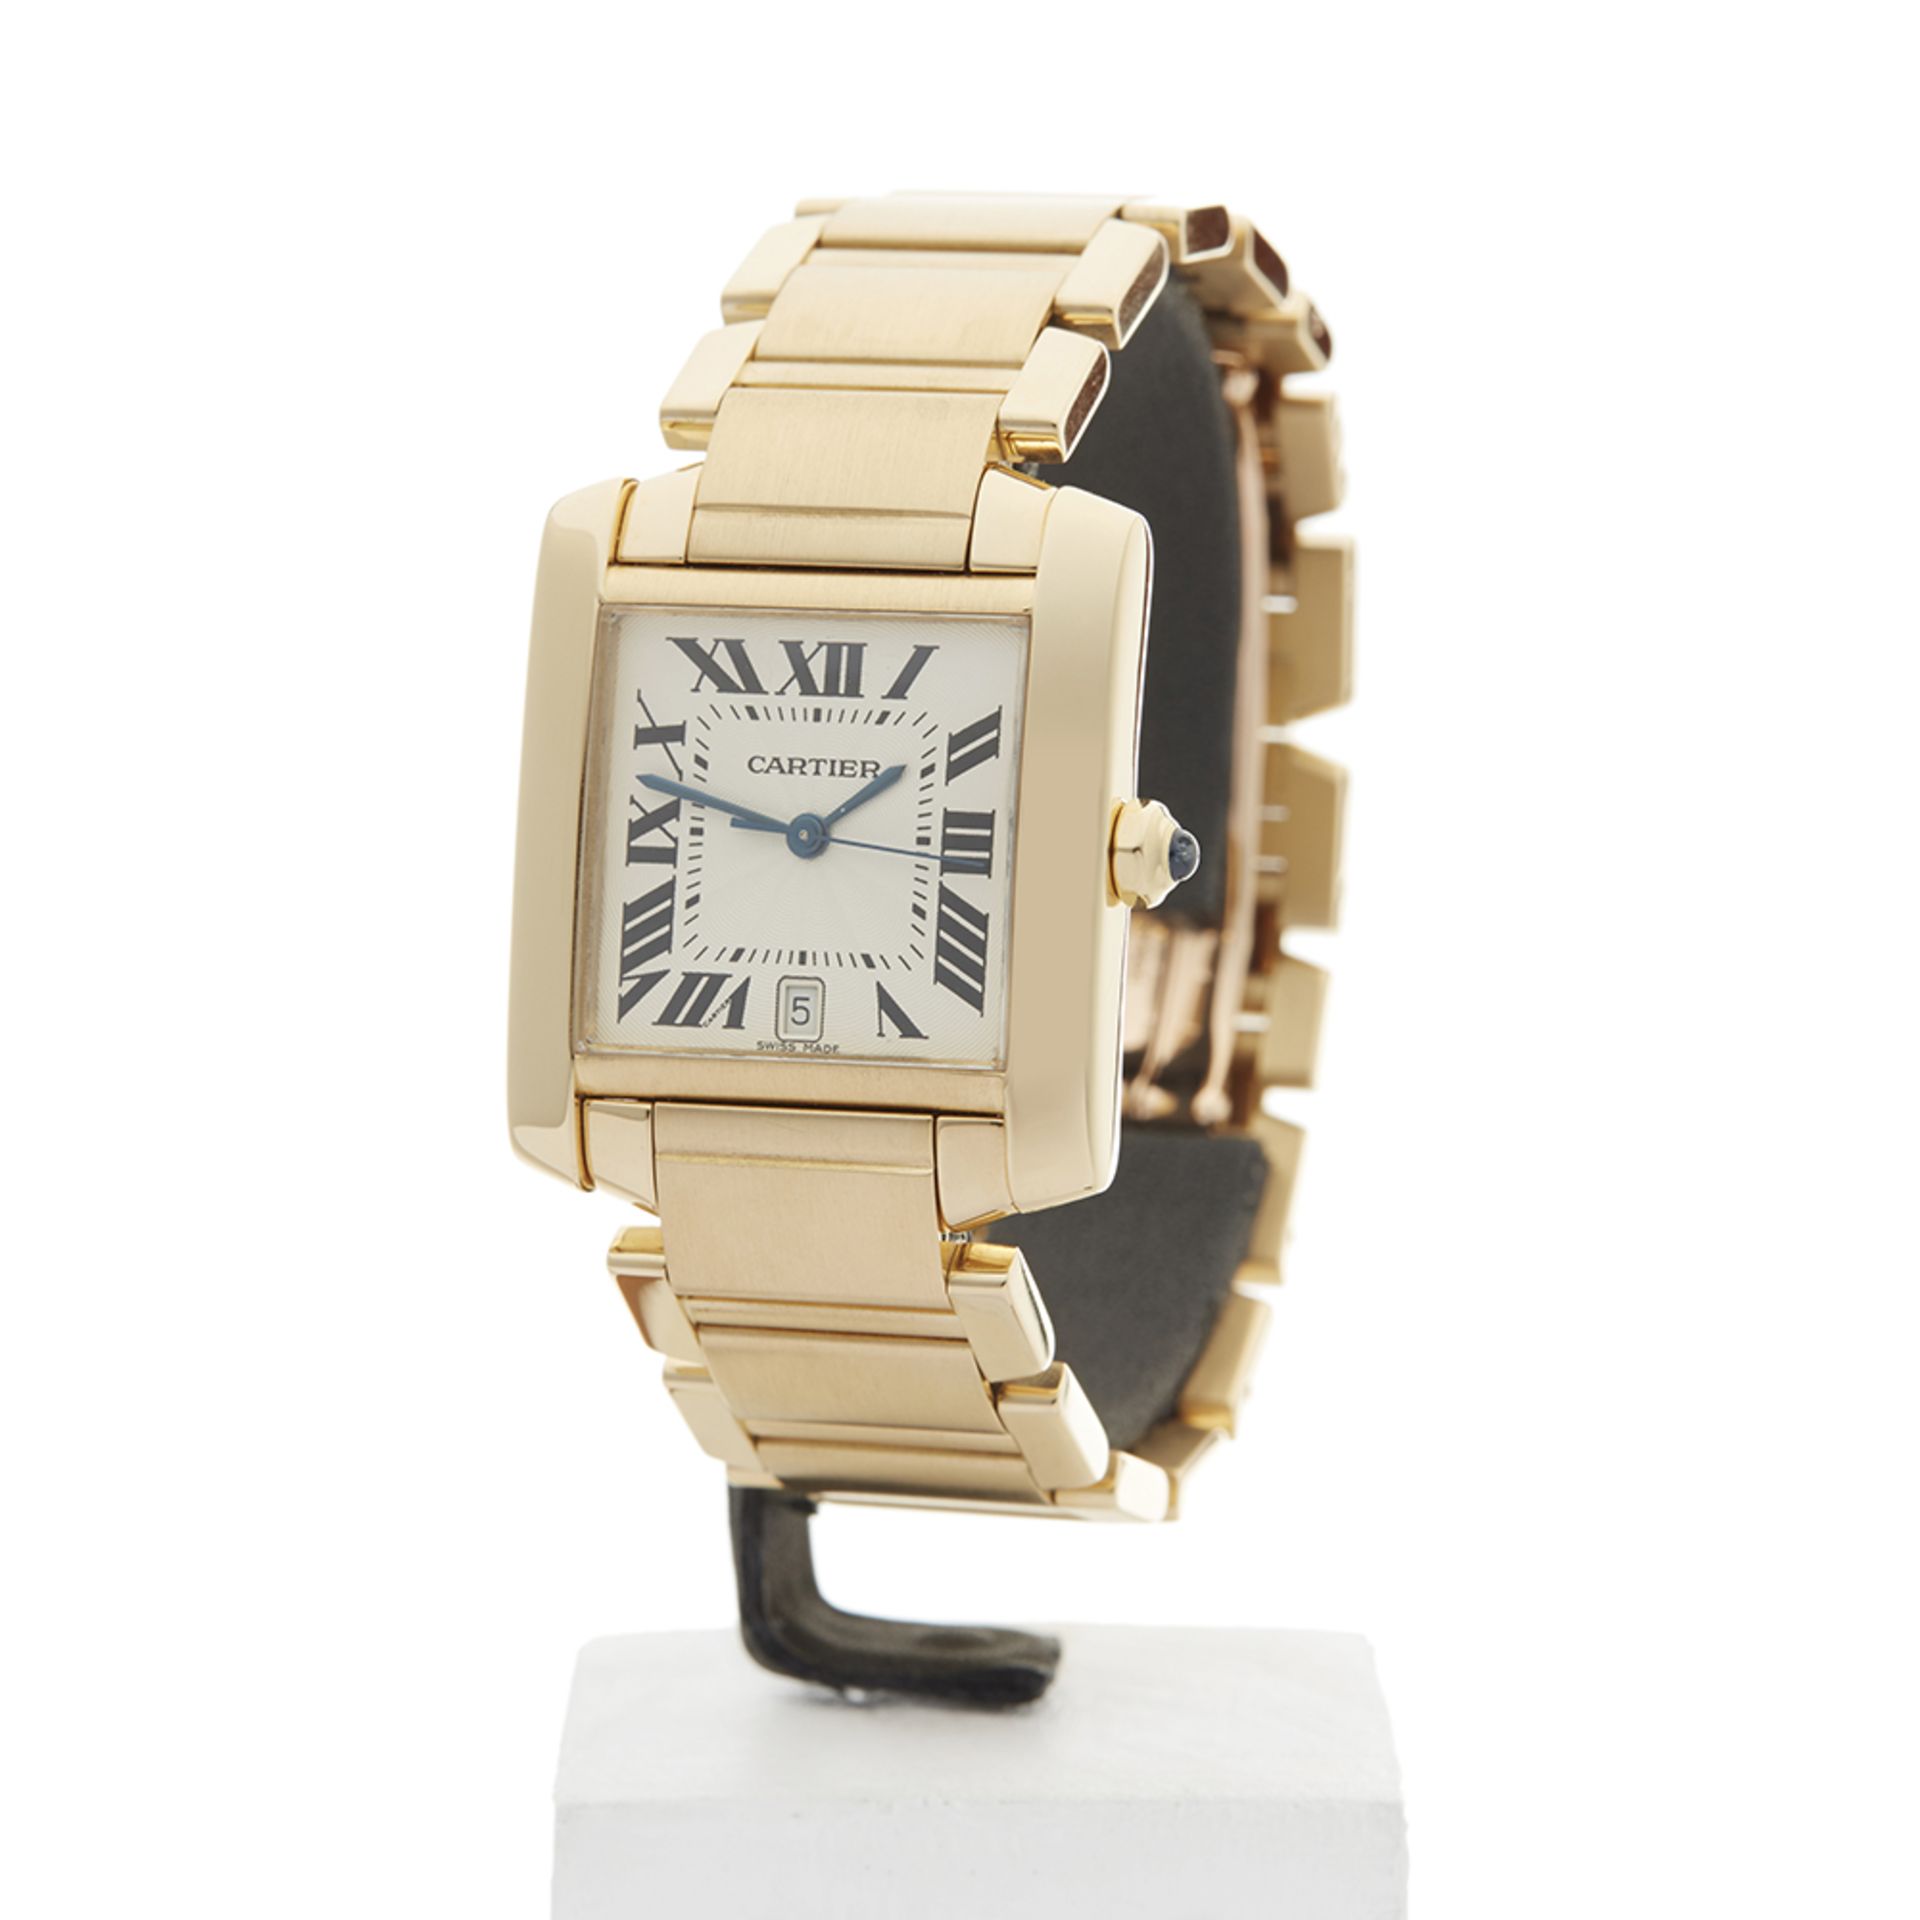 Cartier Tank Francaise 28mm 18k Yellow Gold - 1840 or W50001R2 - Image 3 of 8